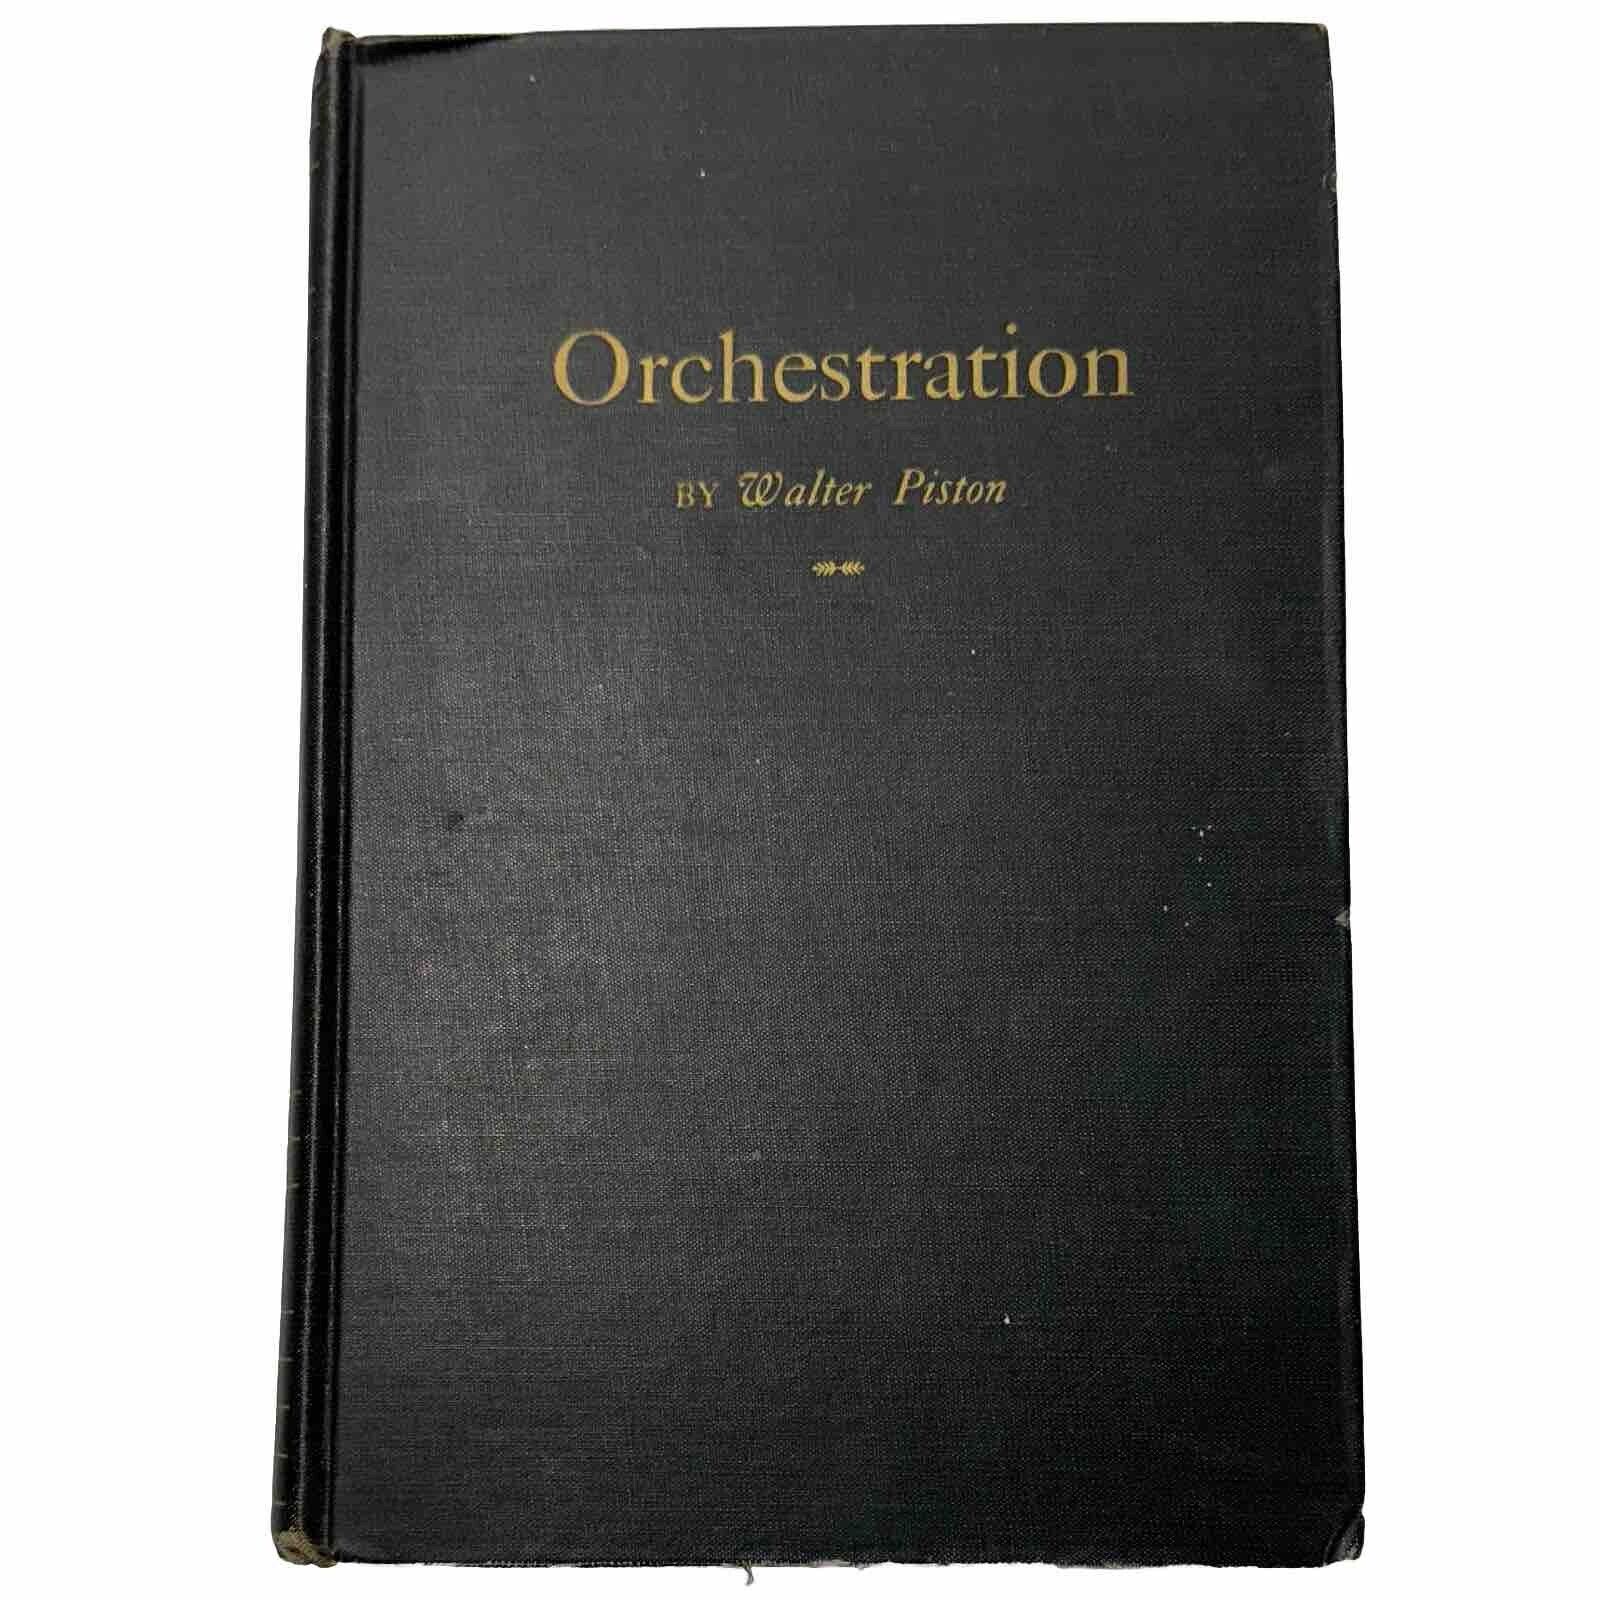 Orchestration by Walter Piston Vintage 1955 Hardcover W.W. Norton - Good